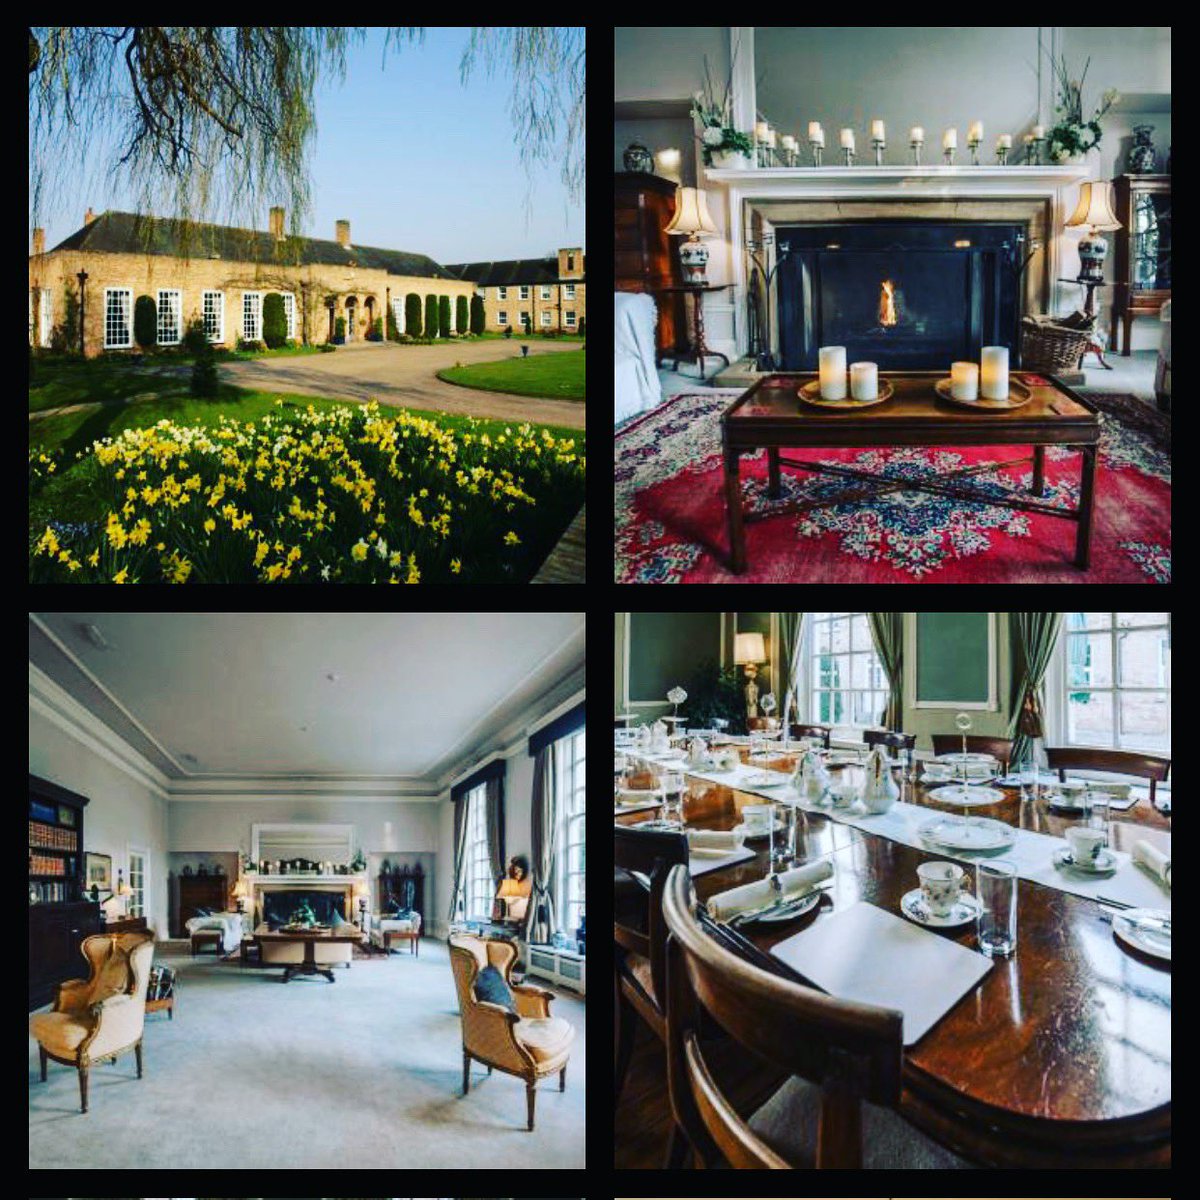 Wow ⁦@HemswellCourt⁩ looking good and now available to book on ⁦⁦@bookingcom⁩ #Lincolnshire ⁦@TeamLincs⁩ #5star #guestaccomodation #hotel #venueforhire